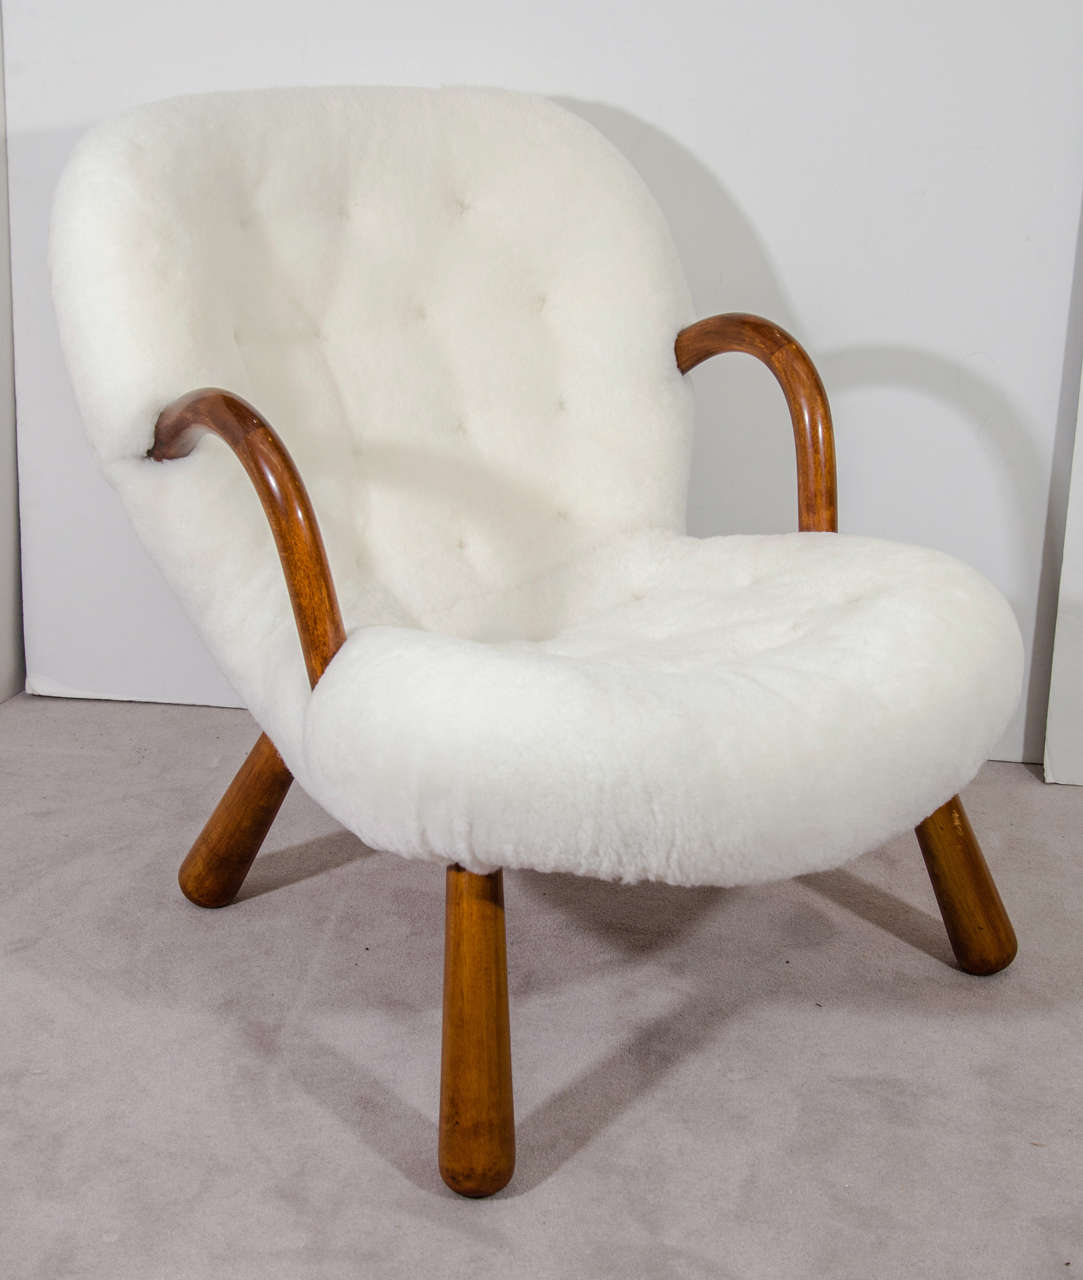 A vintage Danish Modern "Clam" lounge chair by Philip Arctander (the design was until recently widely attributed to Martin Olsen). Originally designed in 1941, the piece has club feet, looped armrests and has been newly reupholstered in